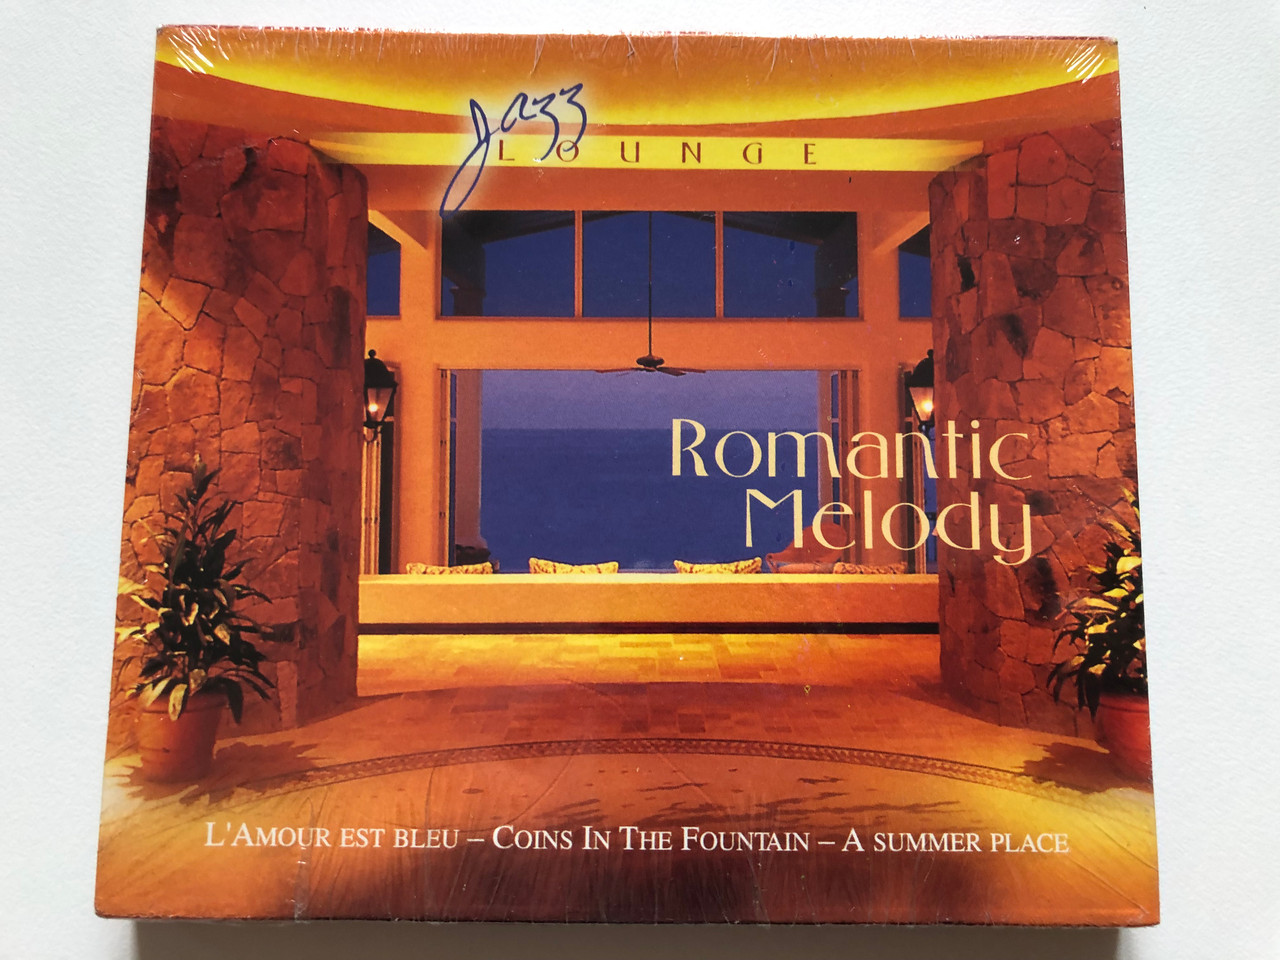 https://cdn10.bigcommerce.com/s-62bdpkt7pb/products/0/images/201314/Jazz_Lounge_Romantic_Melody_LAmour_Est_Bleu_Coins_In_The_Fountain_A_Summer_Place_EuroTrend_Audio_CD_2006_CD_142_1__39364.1638986065.1280.1280.JPG?c=2&_gl=1*1q5c0x7*_ga*MjA2NTIxMjE2MC4xNTkwNTEyNTMy*_ga_WS2VZYPC6G*MTYzODk3MDI5OS4yMDYuMS4xNjM4OTg1ODk0LjM2